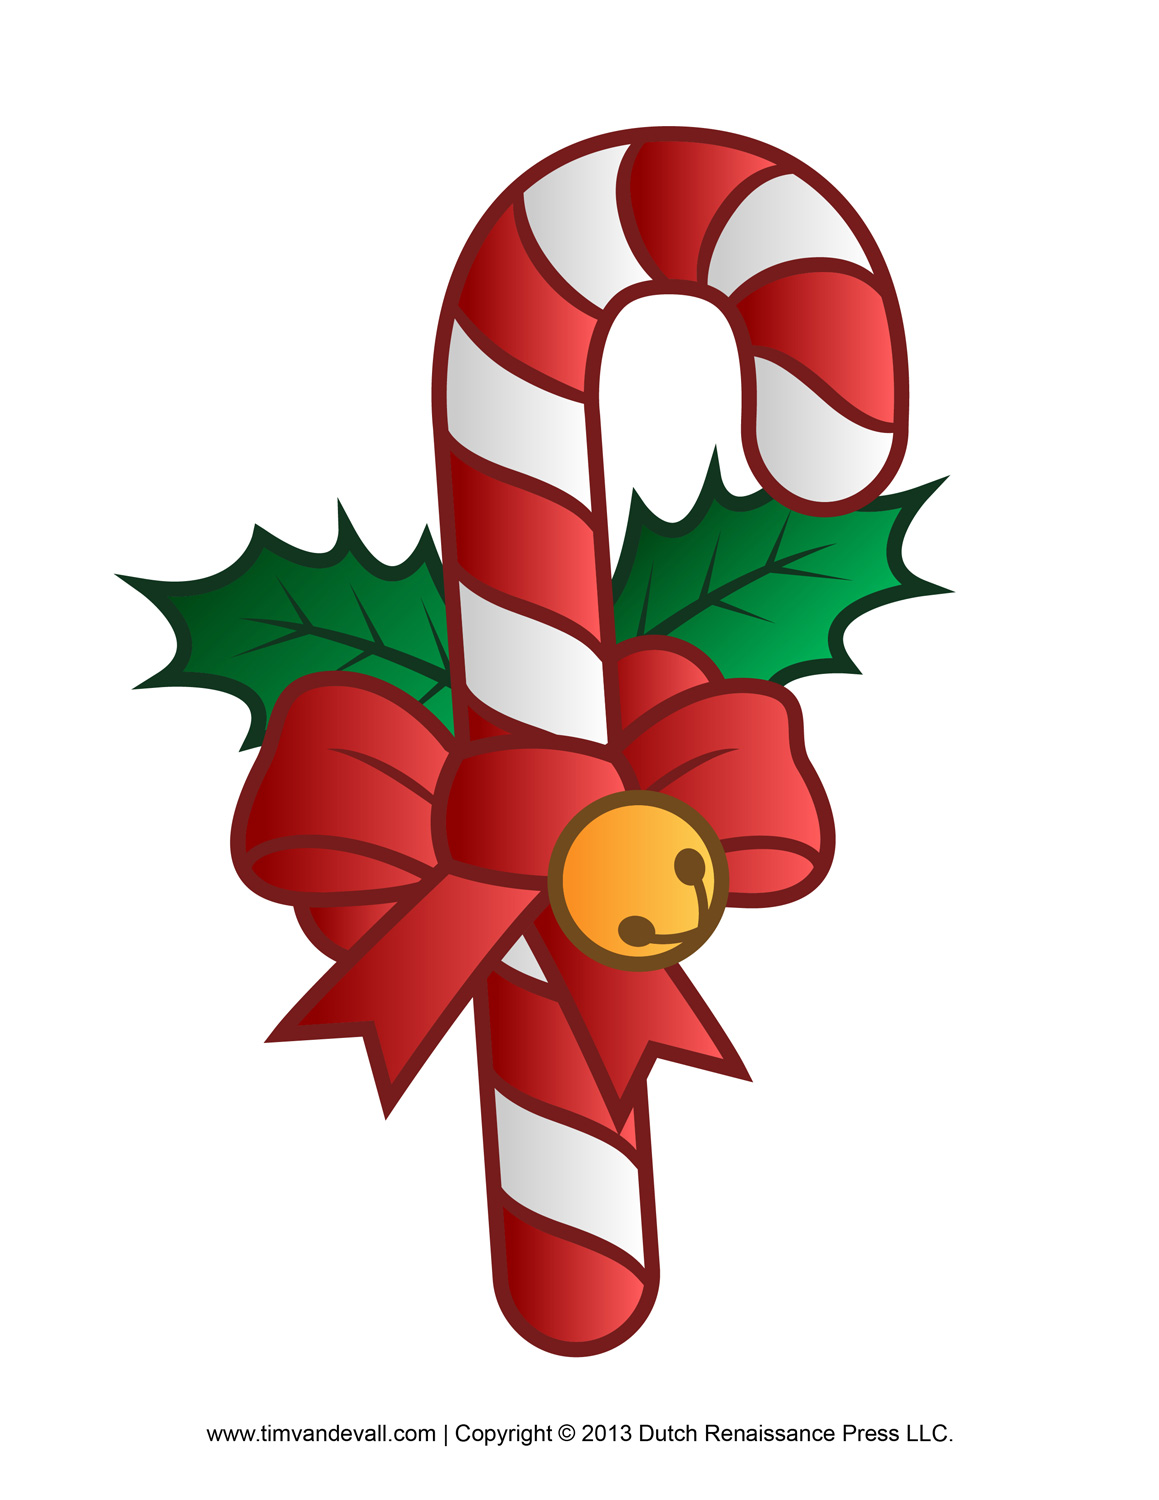 Candy Cane Clip Art and Decor